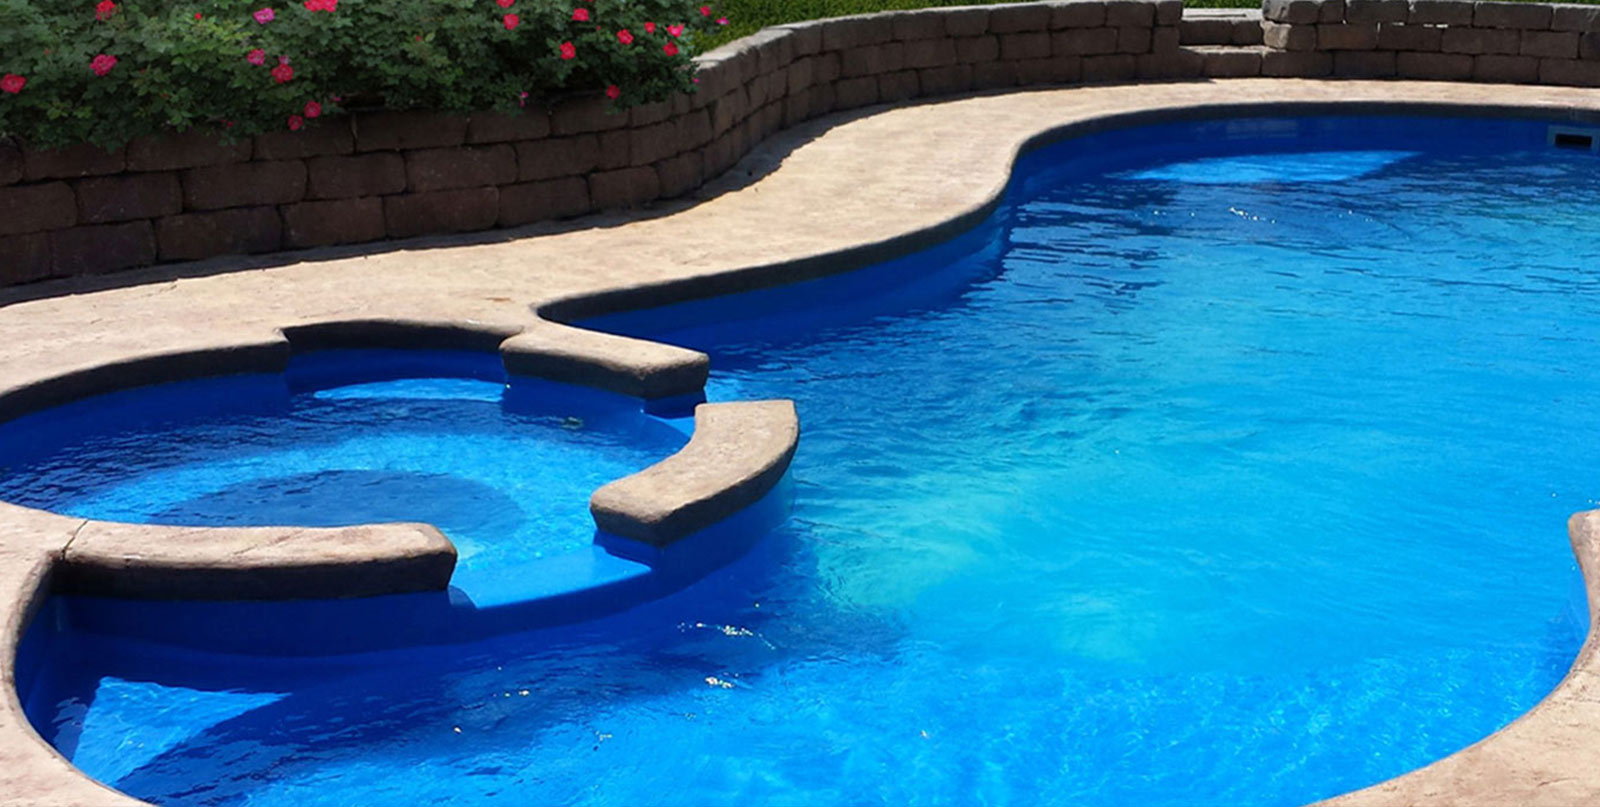 The <span class="t-color1">Pool Service </span>Experts 